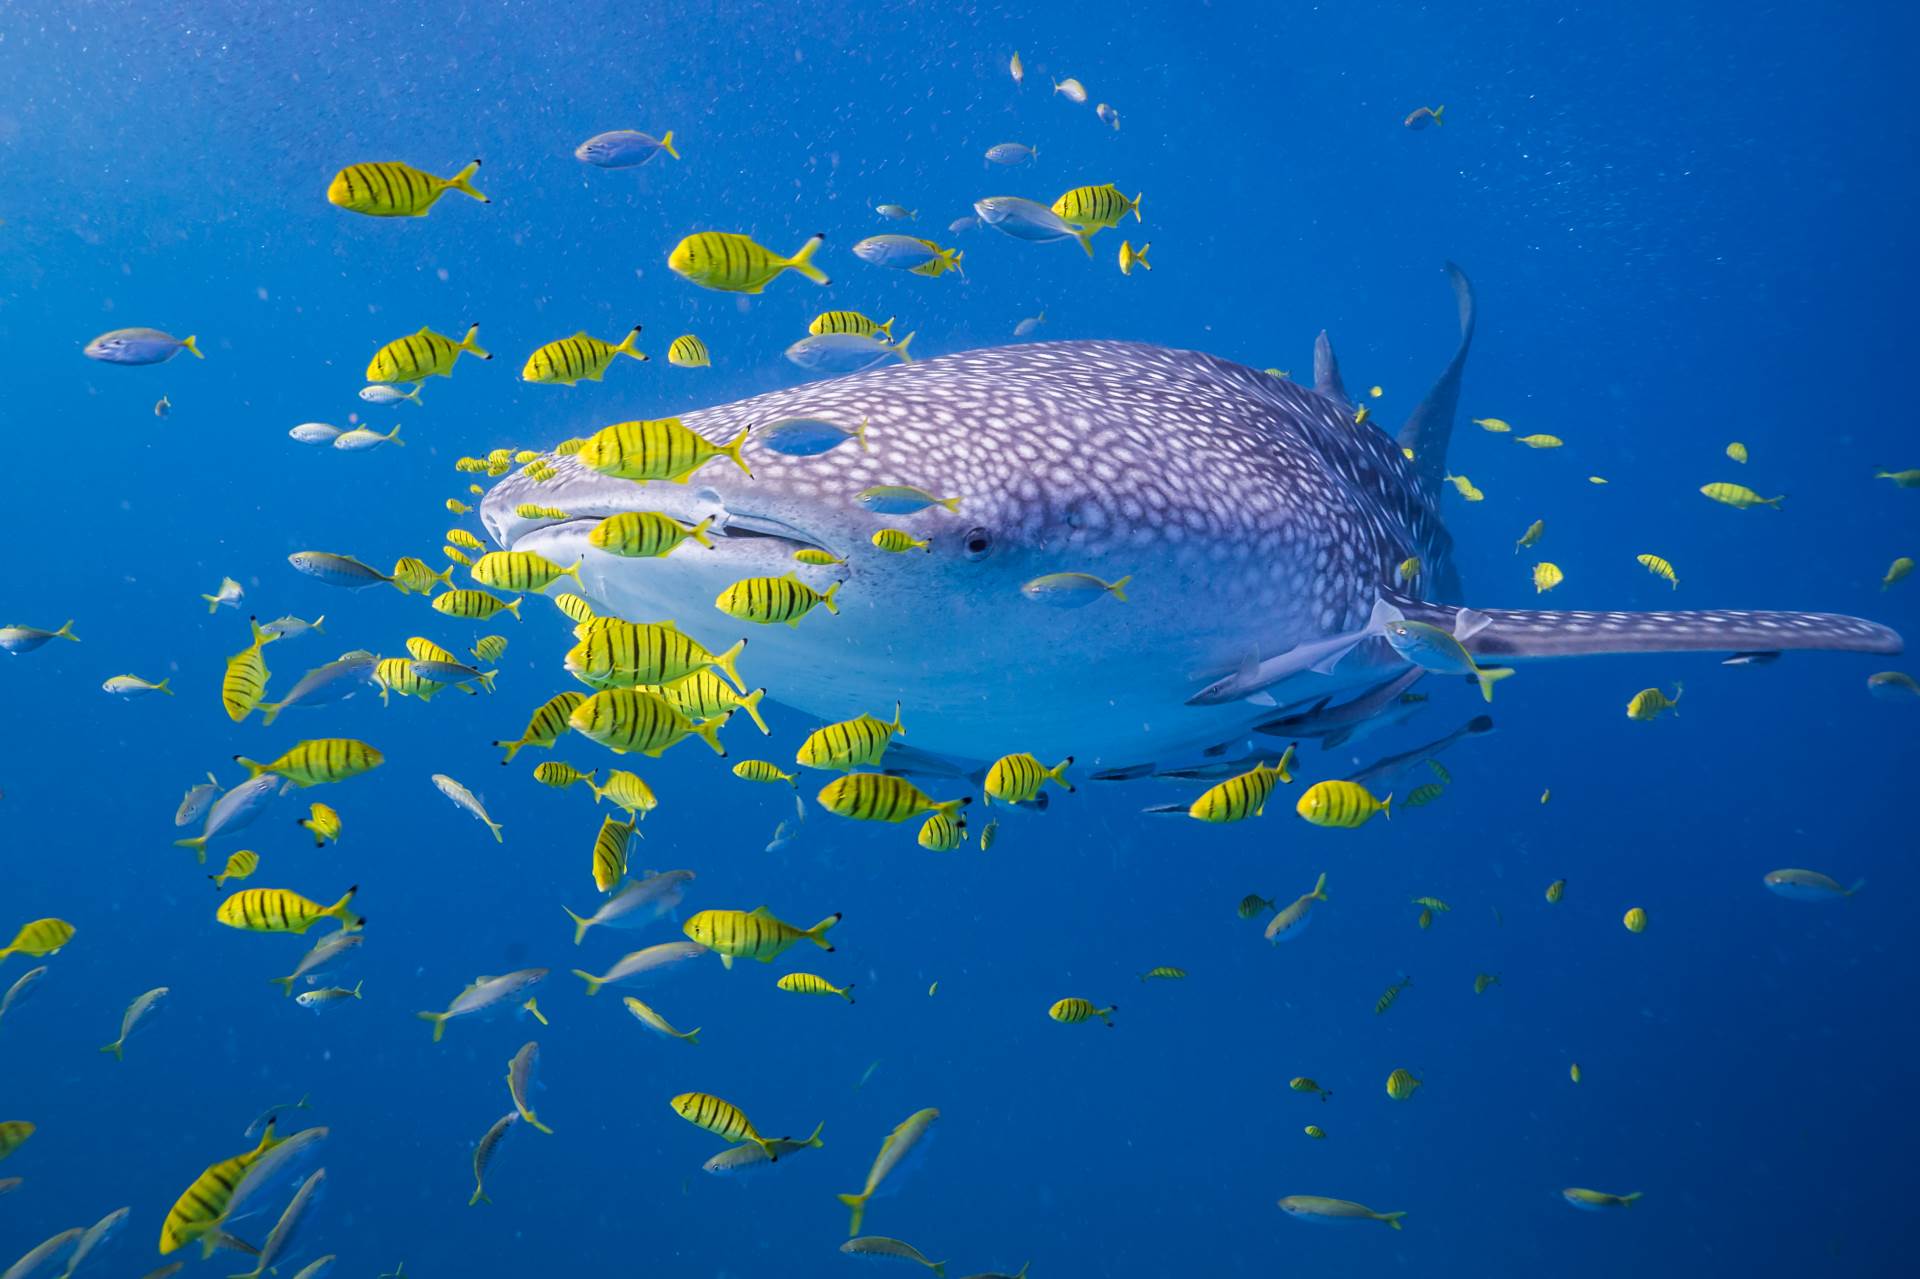 Whale sharks at Mafia Island are like a moving mini-ecosystem. Other fish species, such as golden trevally, striped pilot fish, remoras and cobia swim with them all the time. And when they find a good patch of plankton, other species like sardines join in the feast. This is pretty cool biologically speaking, and also makes for great photos!